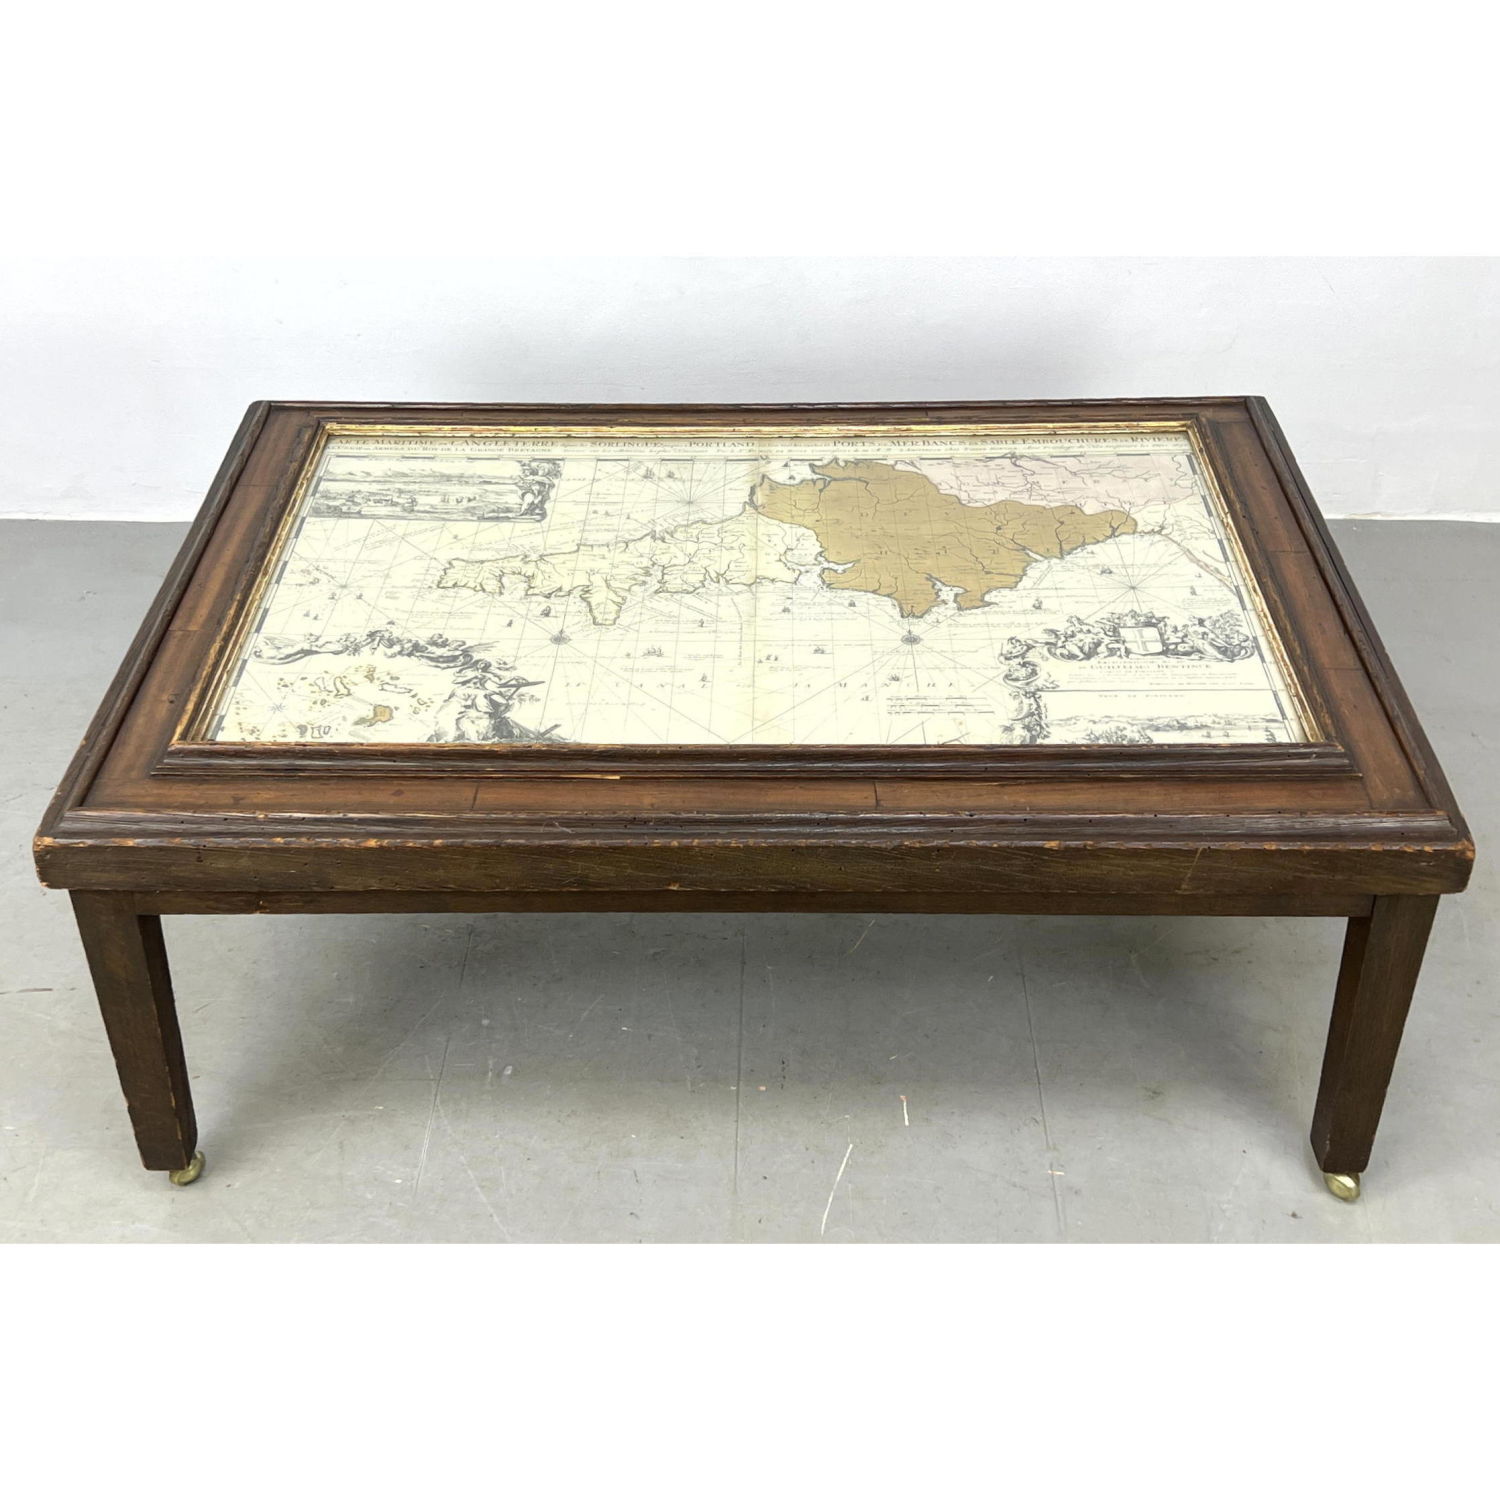 Framed Vintage Map Coffee Table.